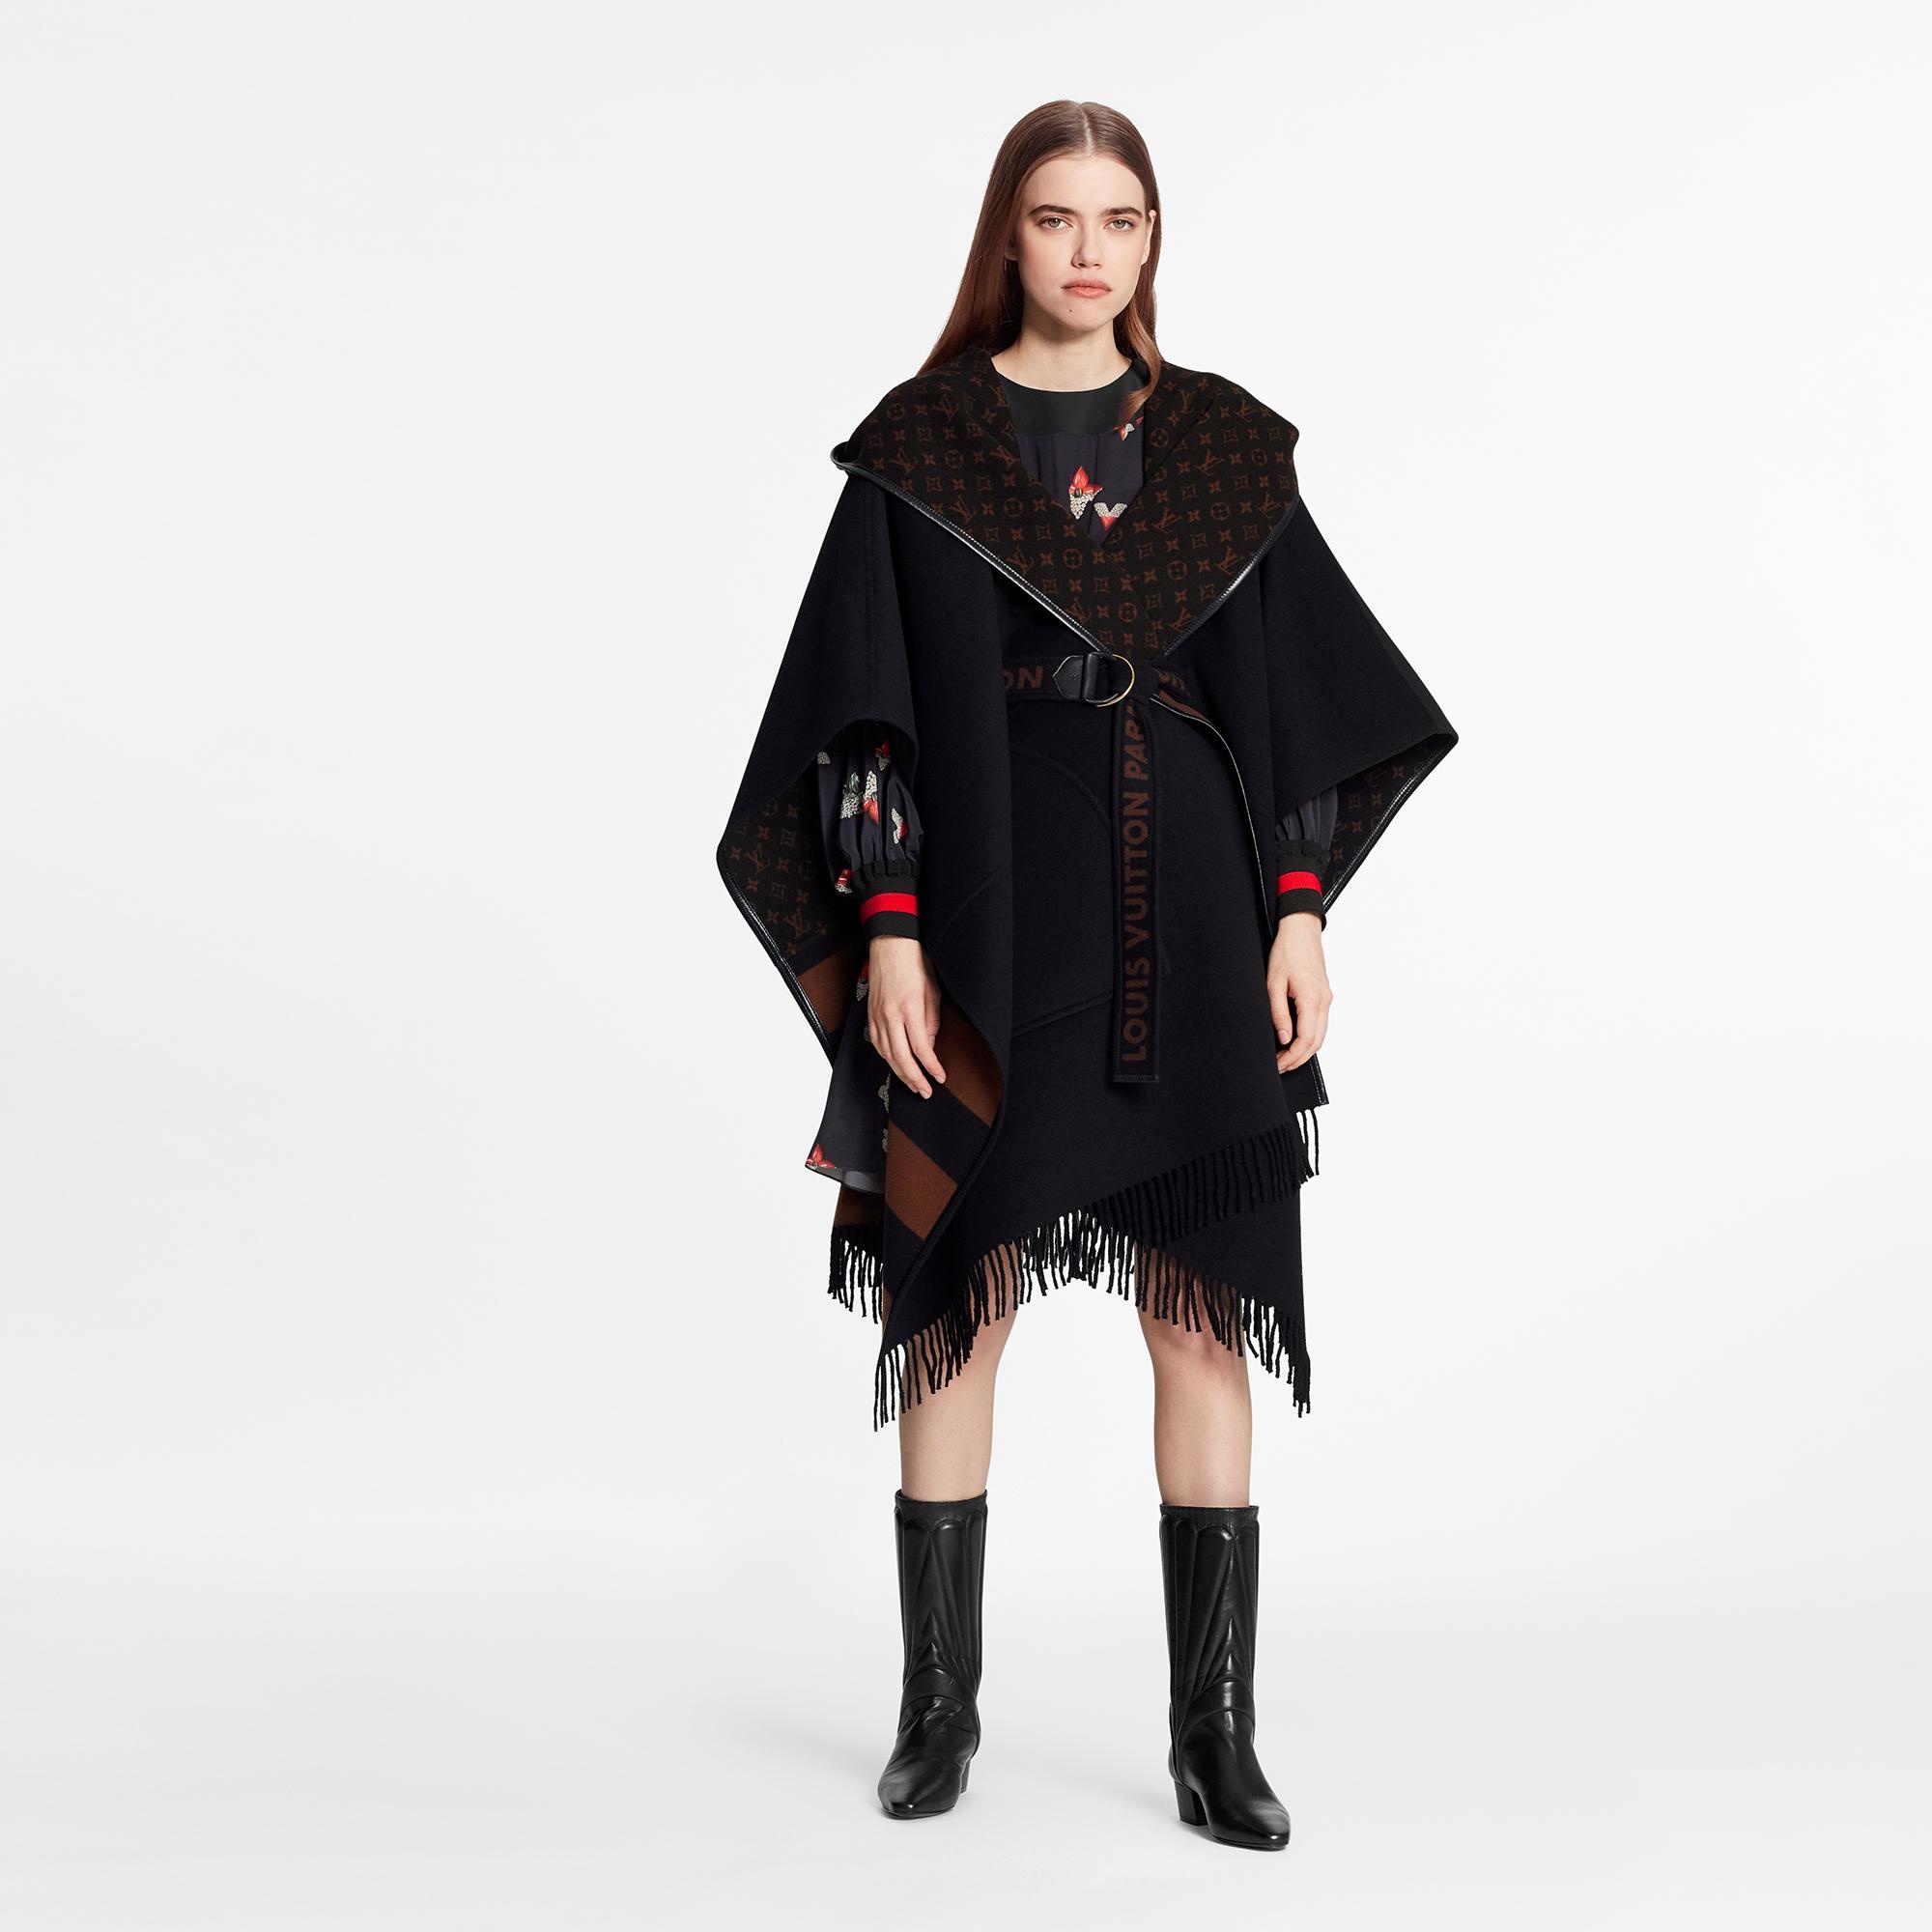 Louis Vuitton Hooded Cape Coat With Belt